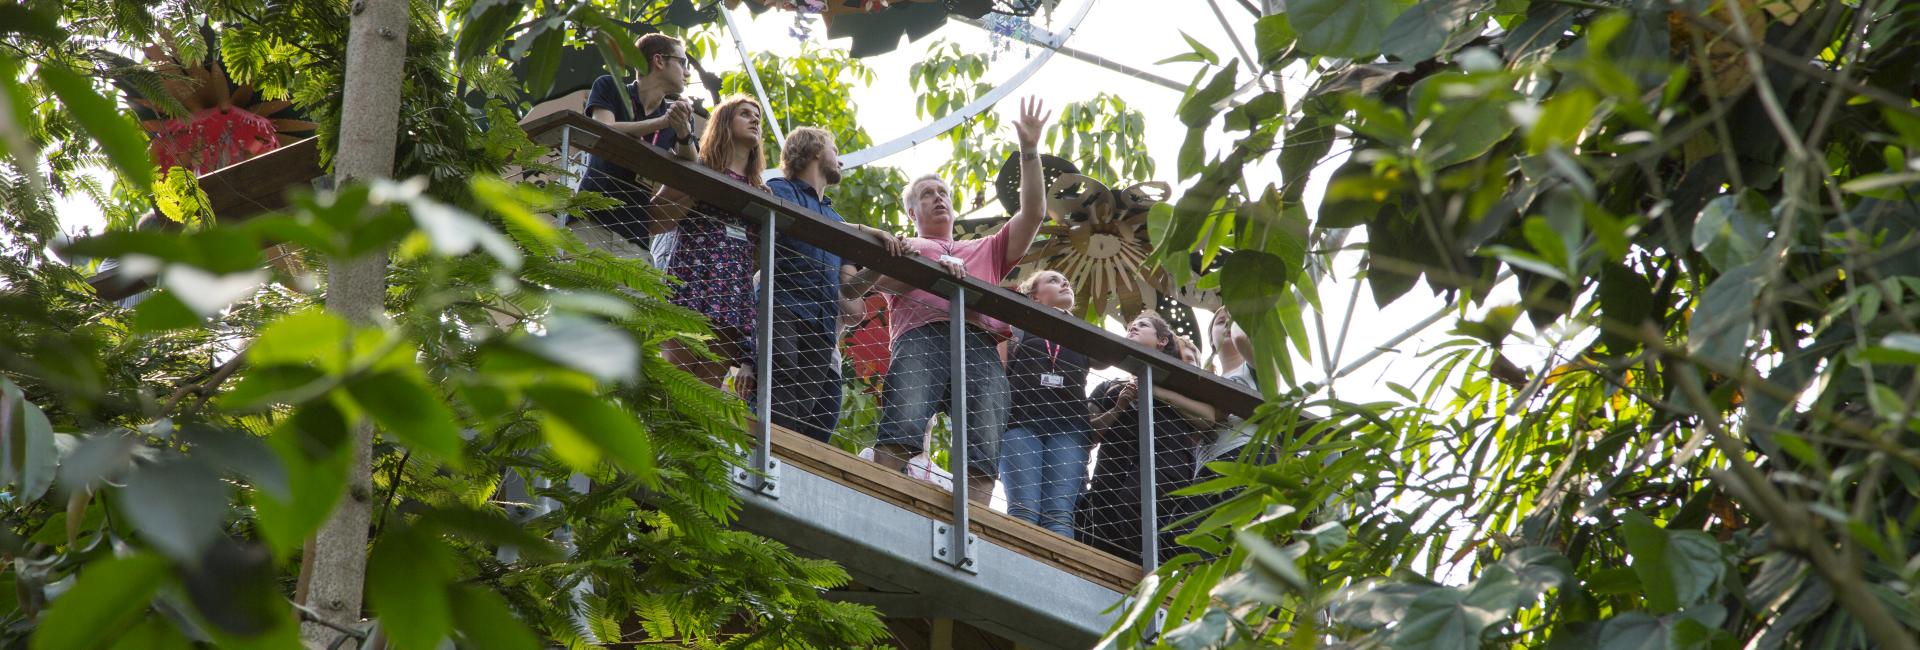 Students on Rainforest Walkway being shown the Biome by their tutor